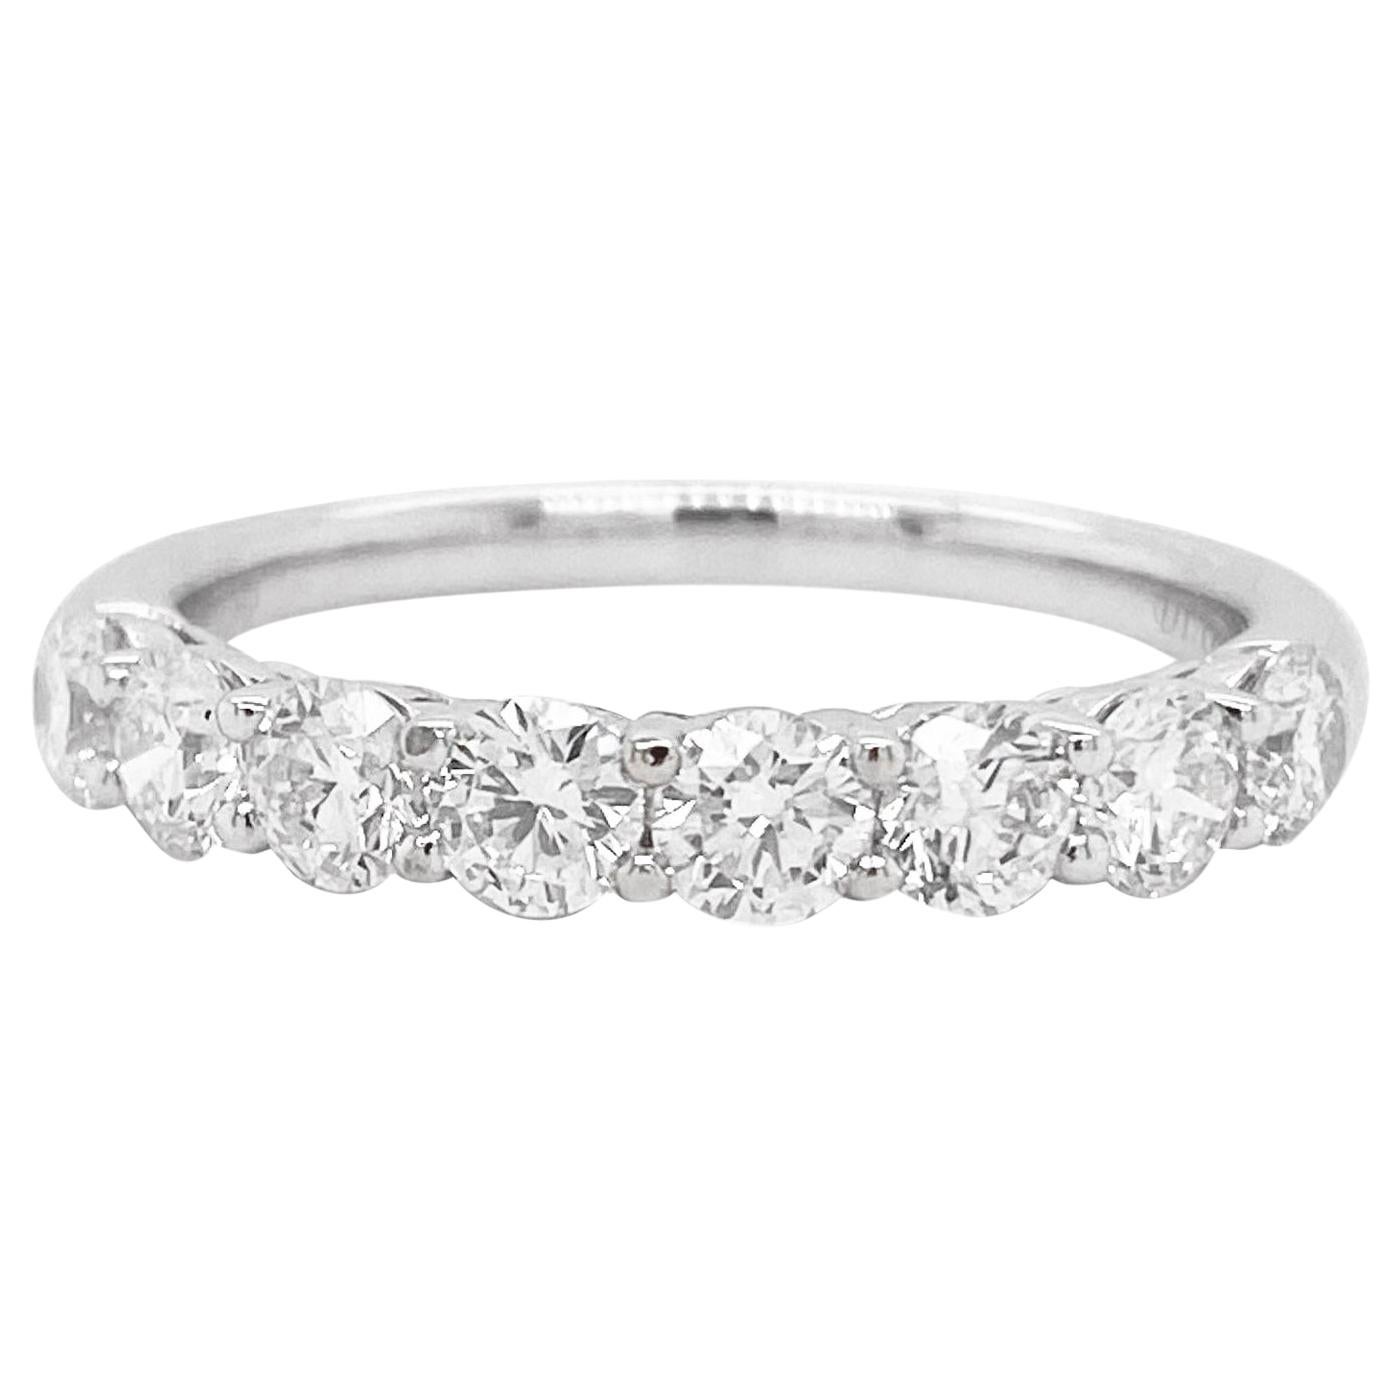 For Sale:  Diamond Band Ring, 1.11 Carat Round Diamond, Wedding Band, Stackable